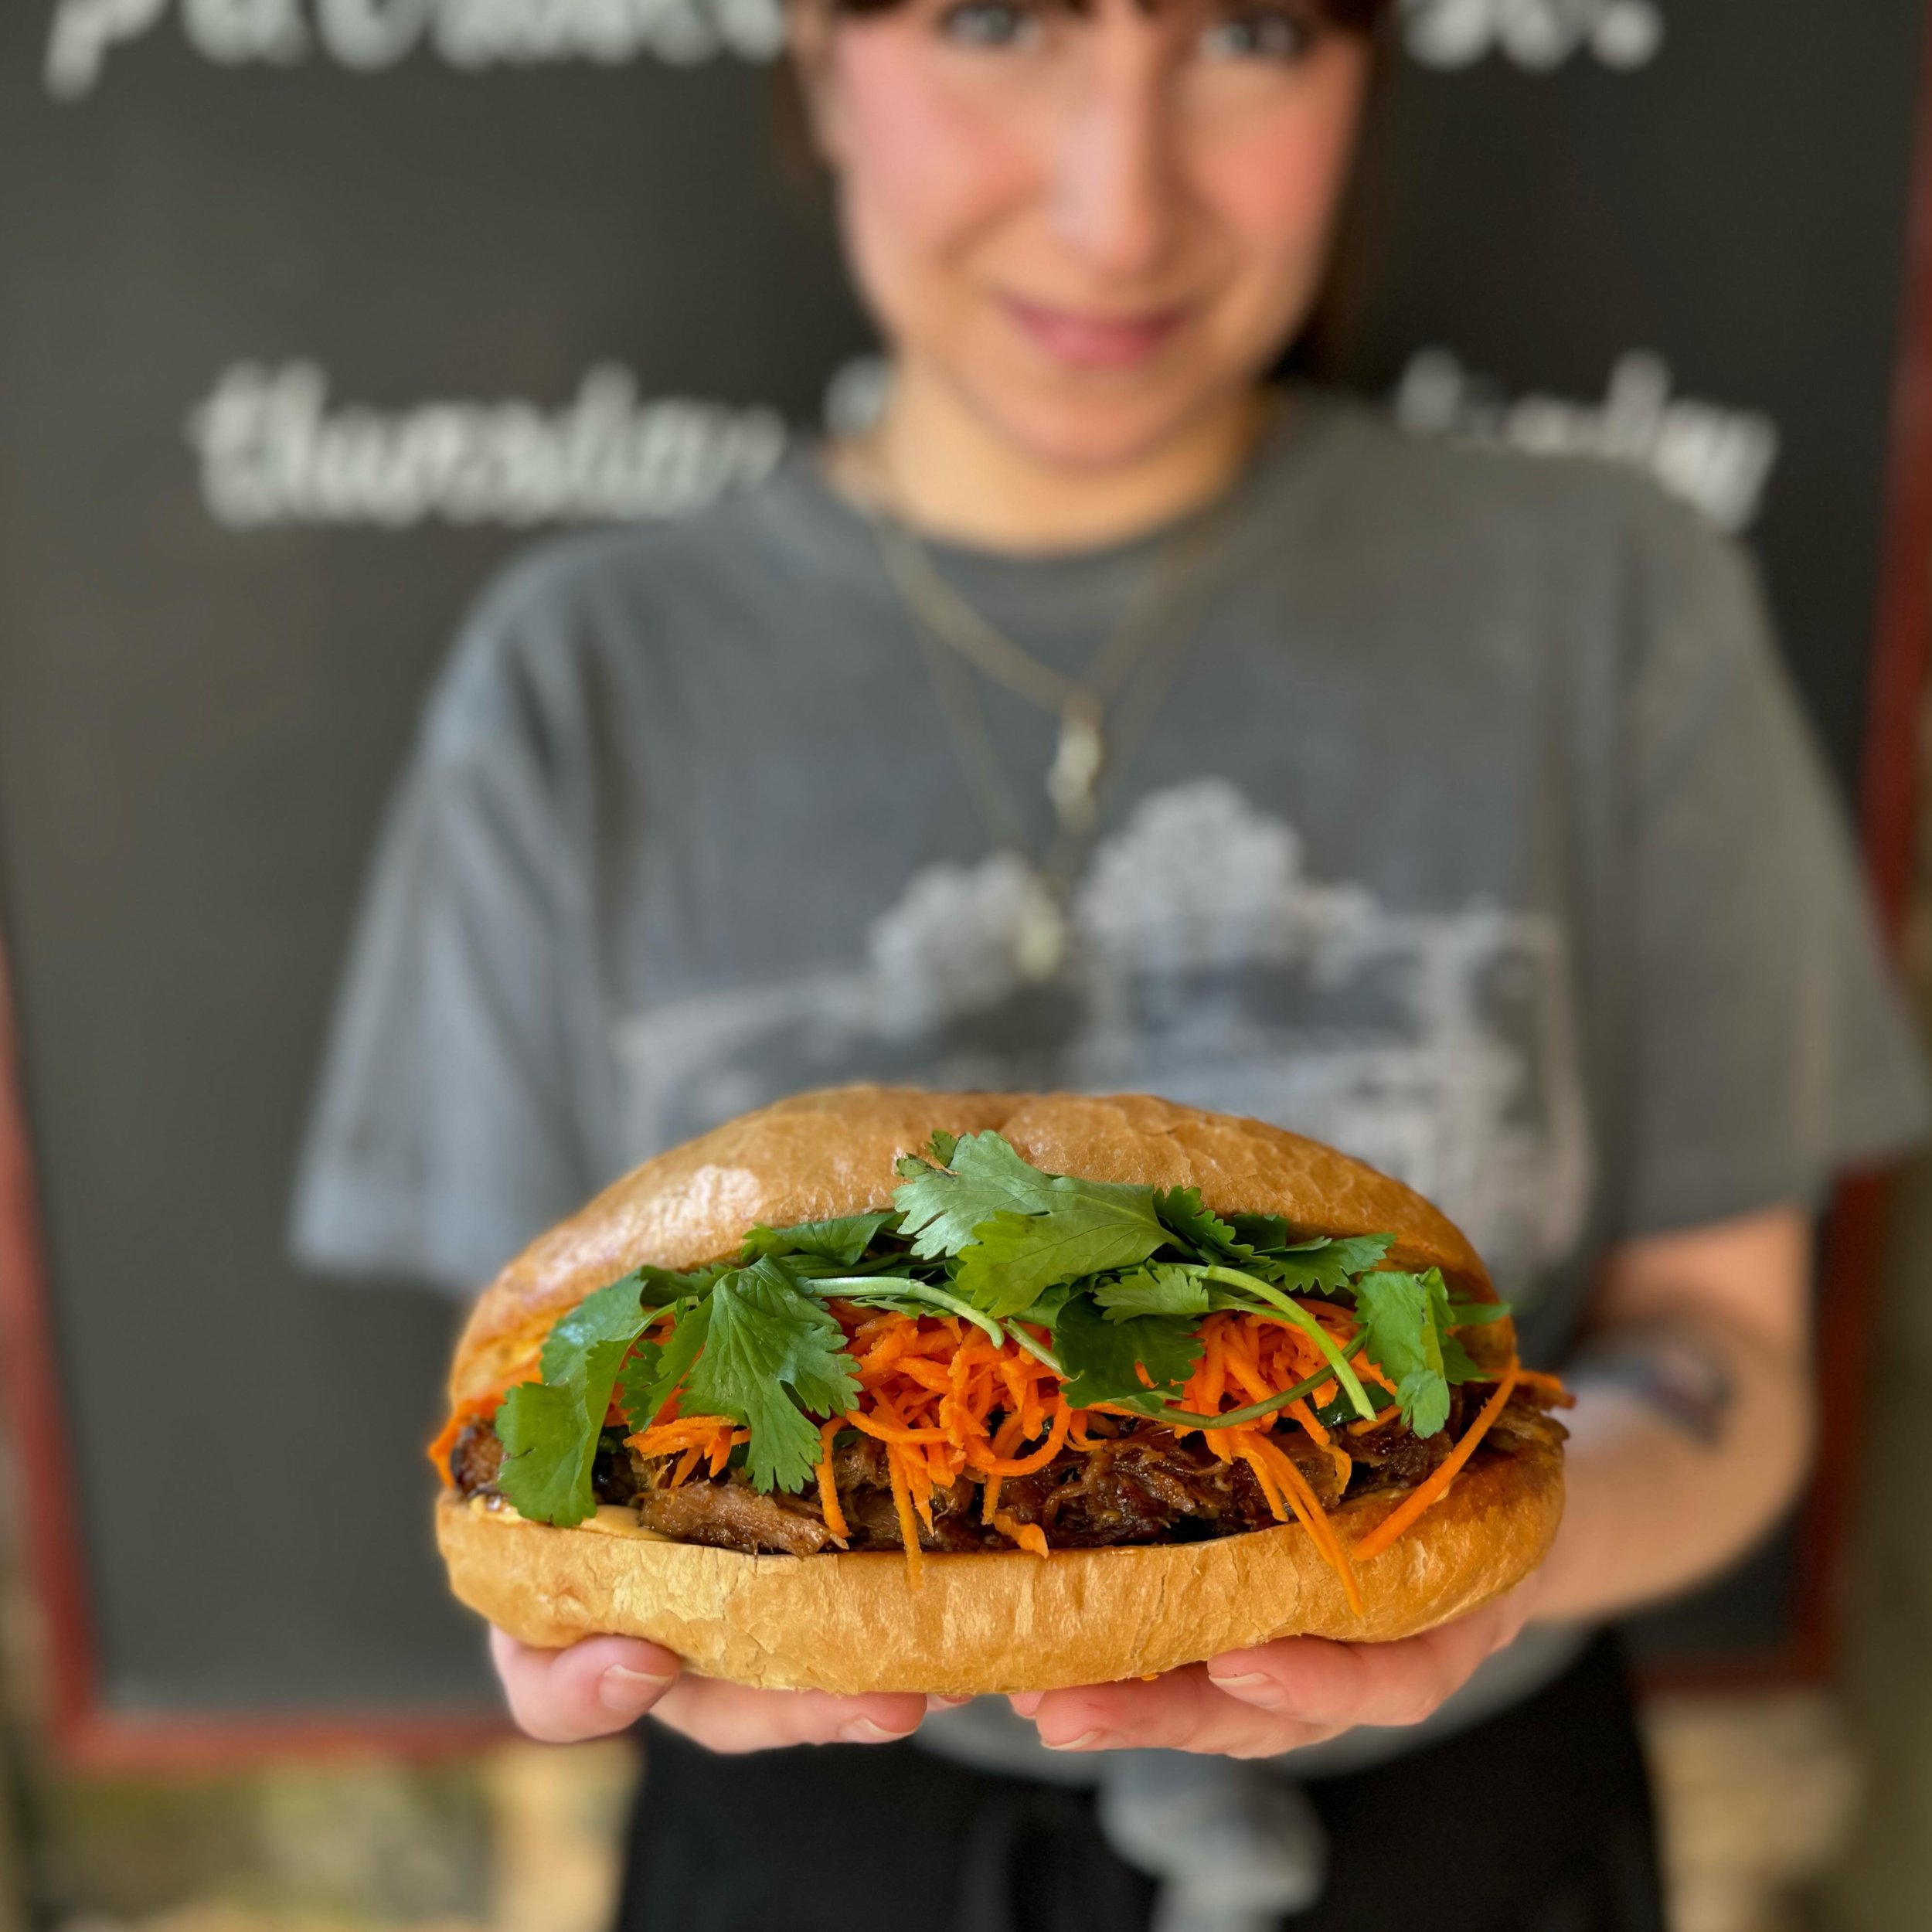 Our ginger braised pork b&aacute;nh m&igrave; is back! With pickled carrots, jalape&ntilde;os, cilantro and spicy aioli!

Stop by and enjoy one today! Available today and tomorrow till 3pm.